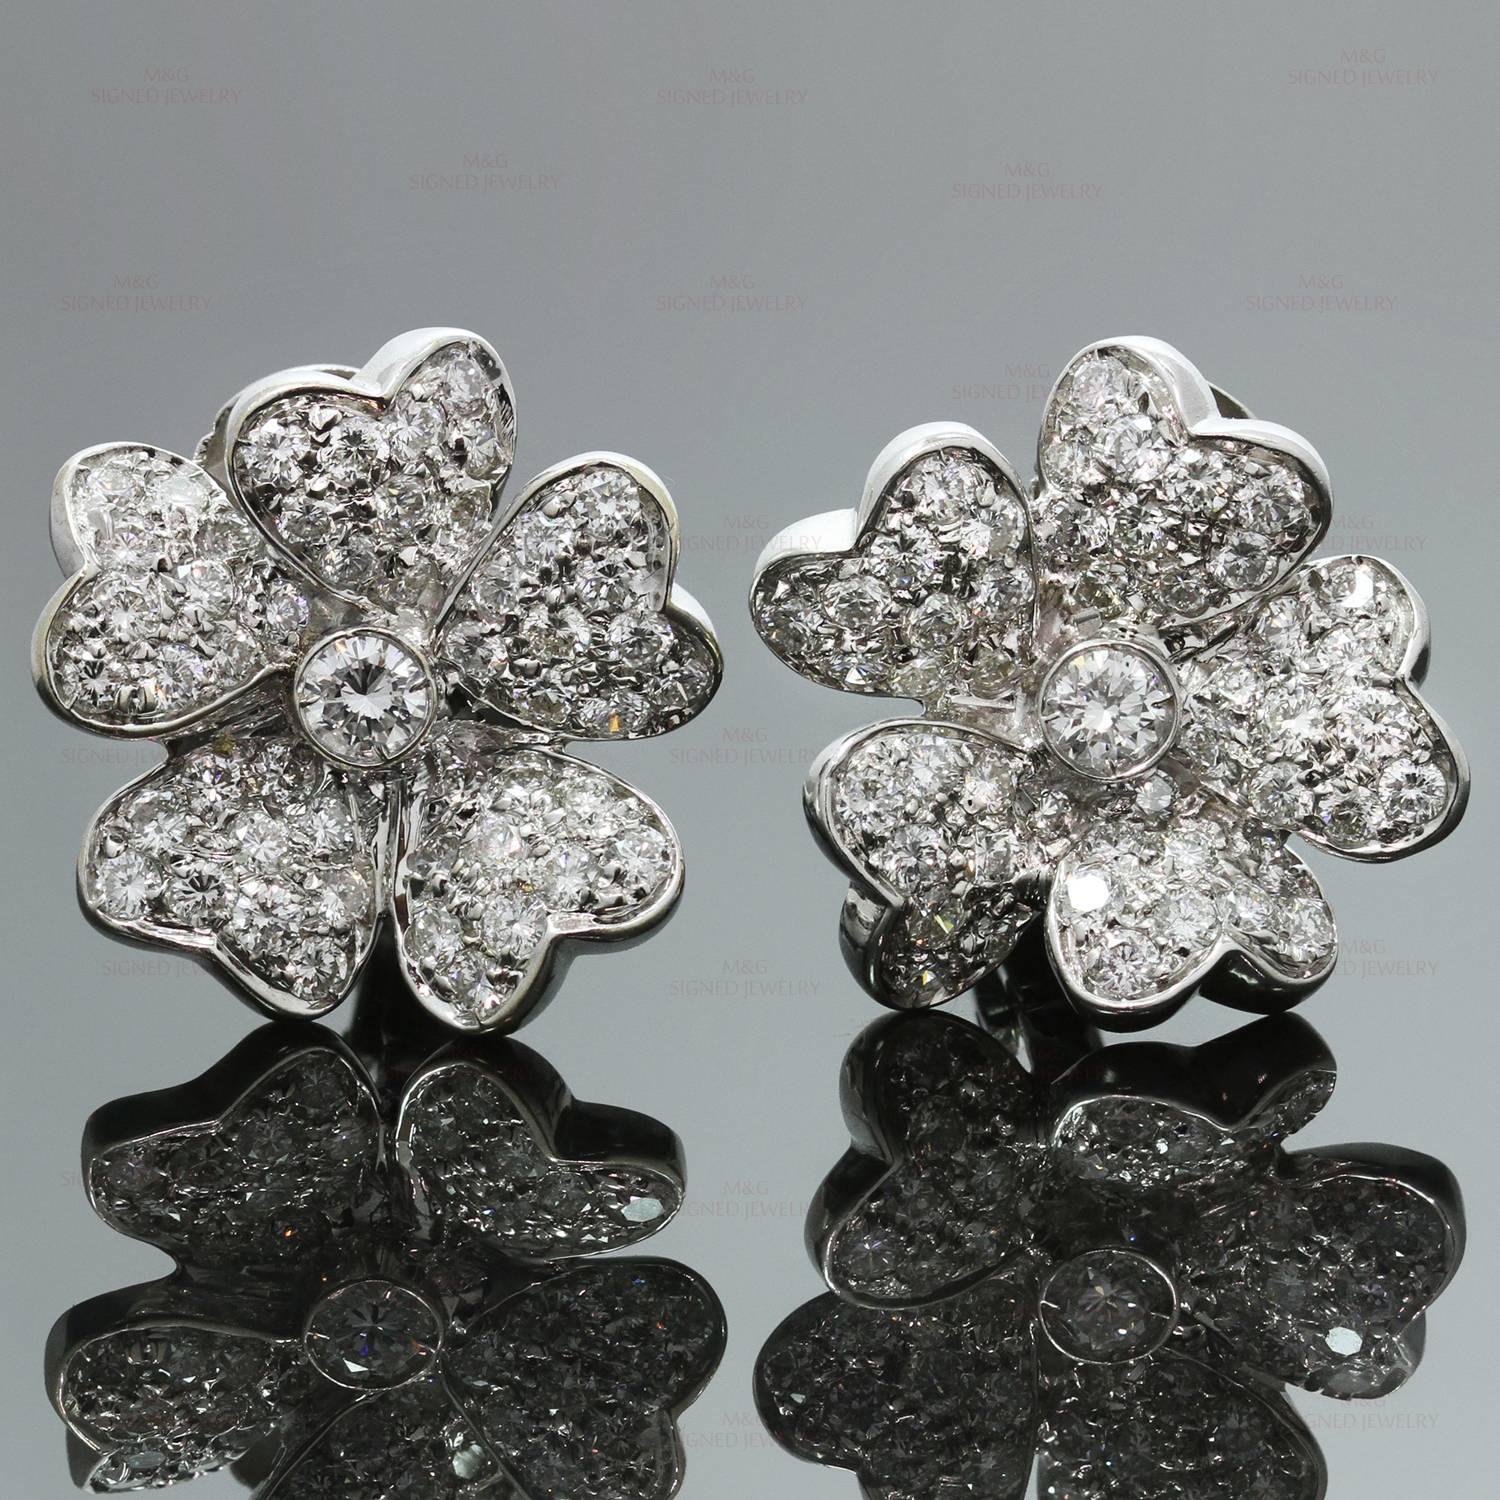 These exquisite modern earrings feature a sparkling 5-petal flower design crafted in 18k white gold and set with brilliant-cut diamonds of an estimated 3.70 carats. Made in italy circa 2000s. Measurements: 0.78" (20mm) width. 